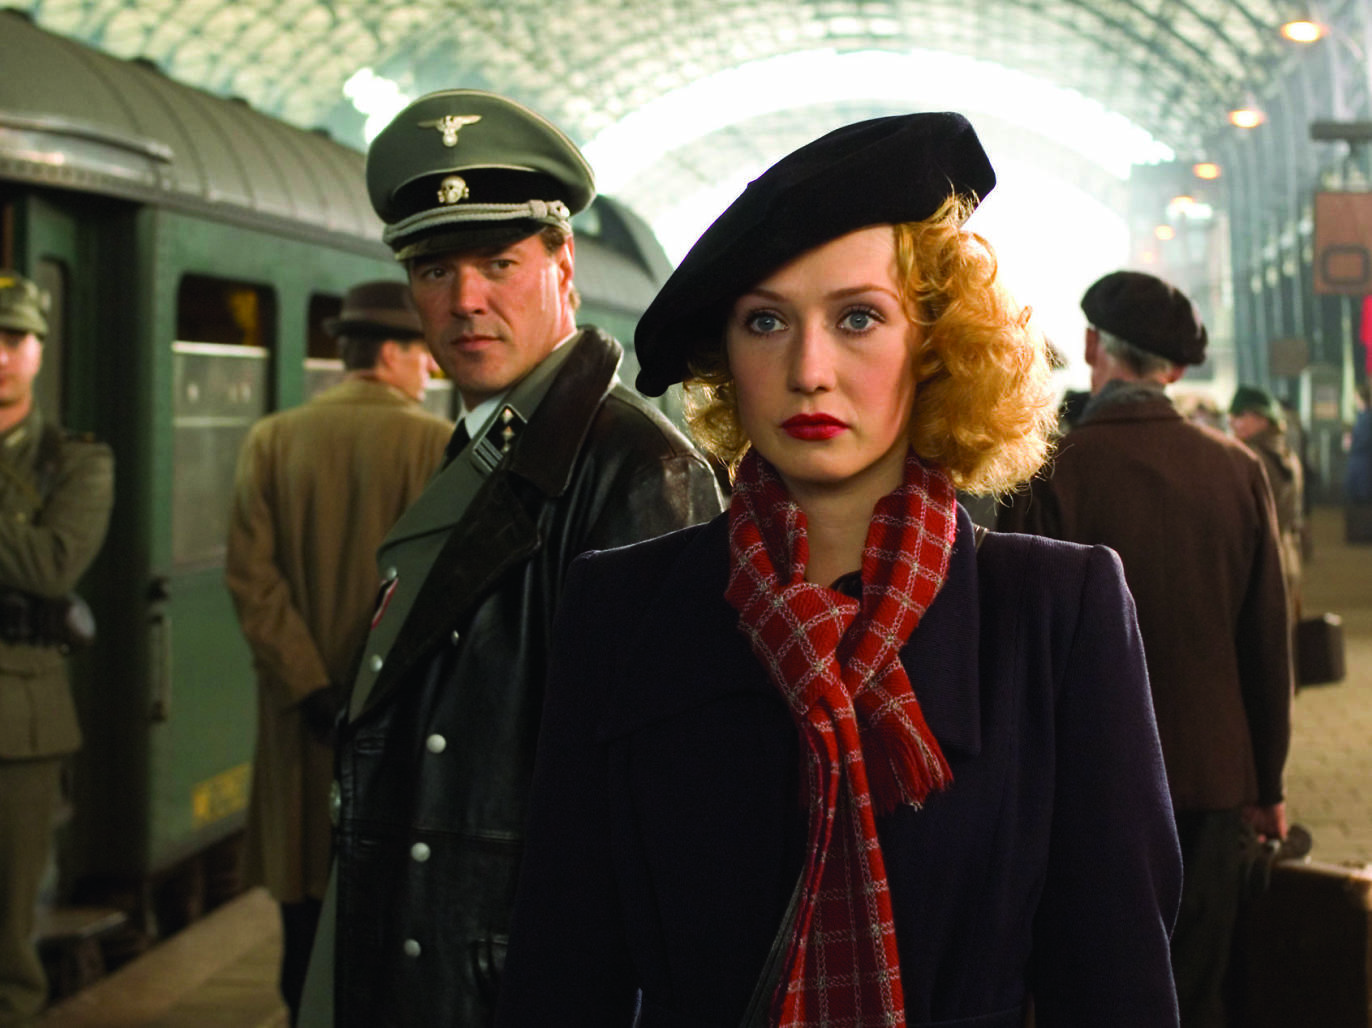 50 Best World War II Movies Of All Time To Watch Right Now